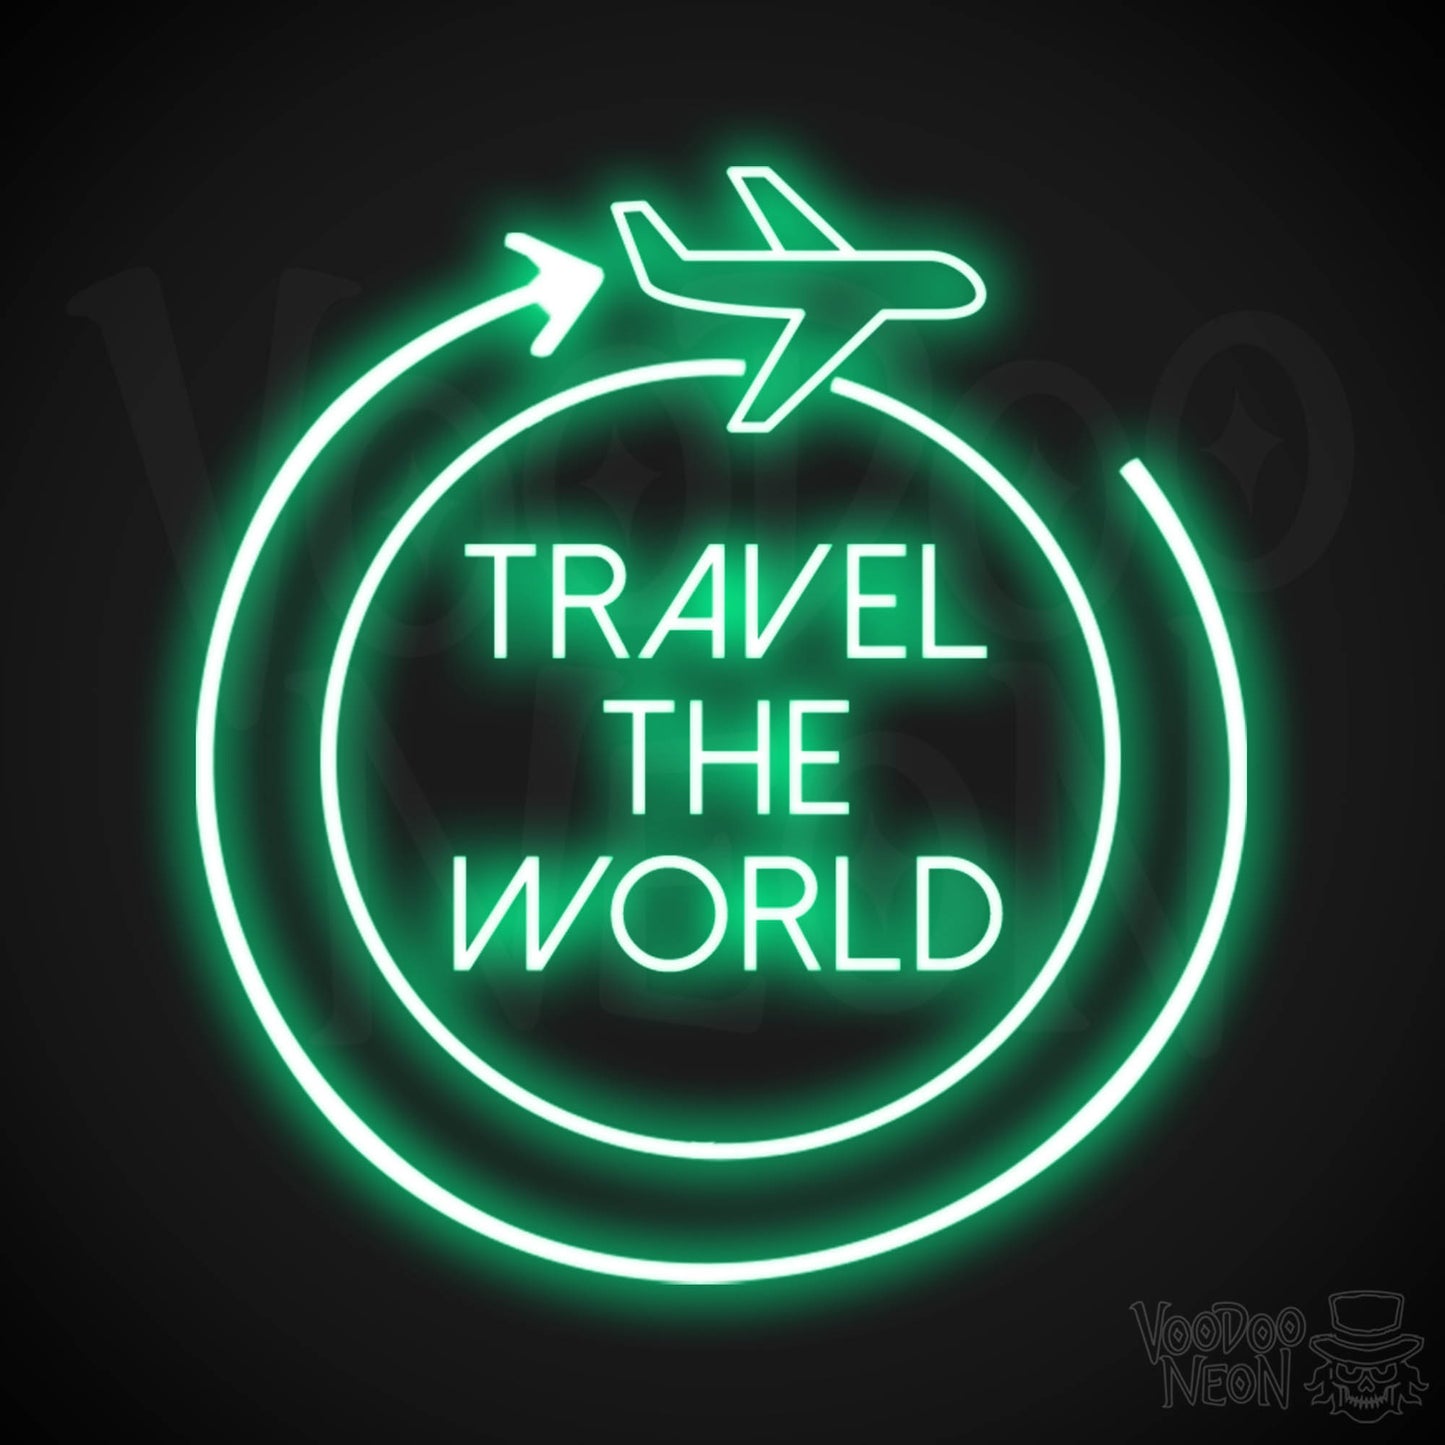 Let's Travel The World Neon Sign - LED Neon Wall Art - Color Green